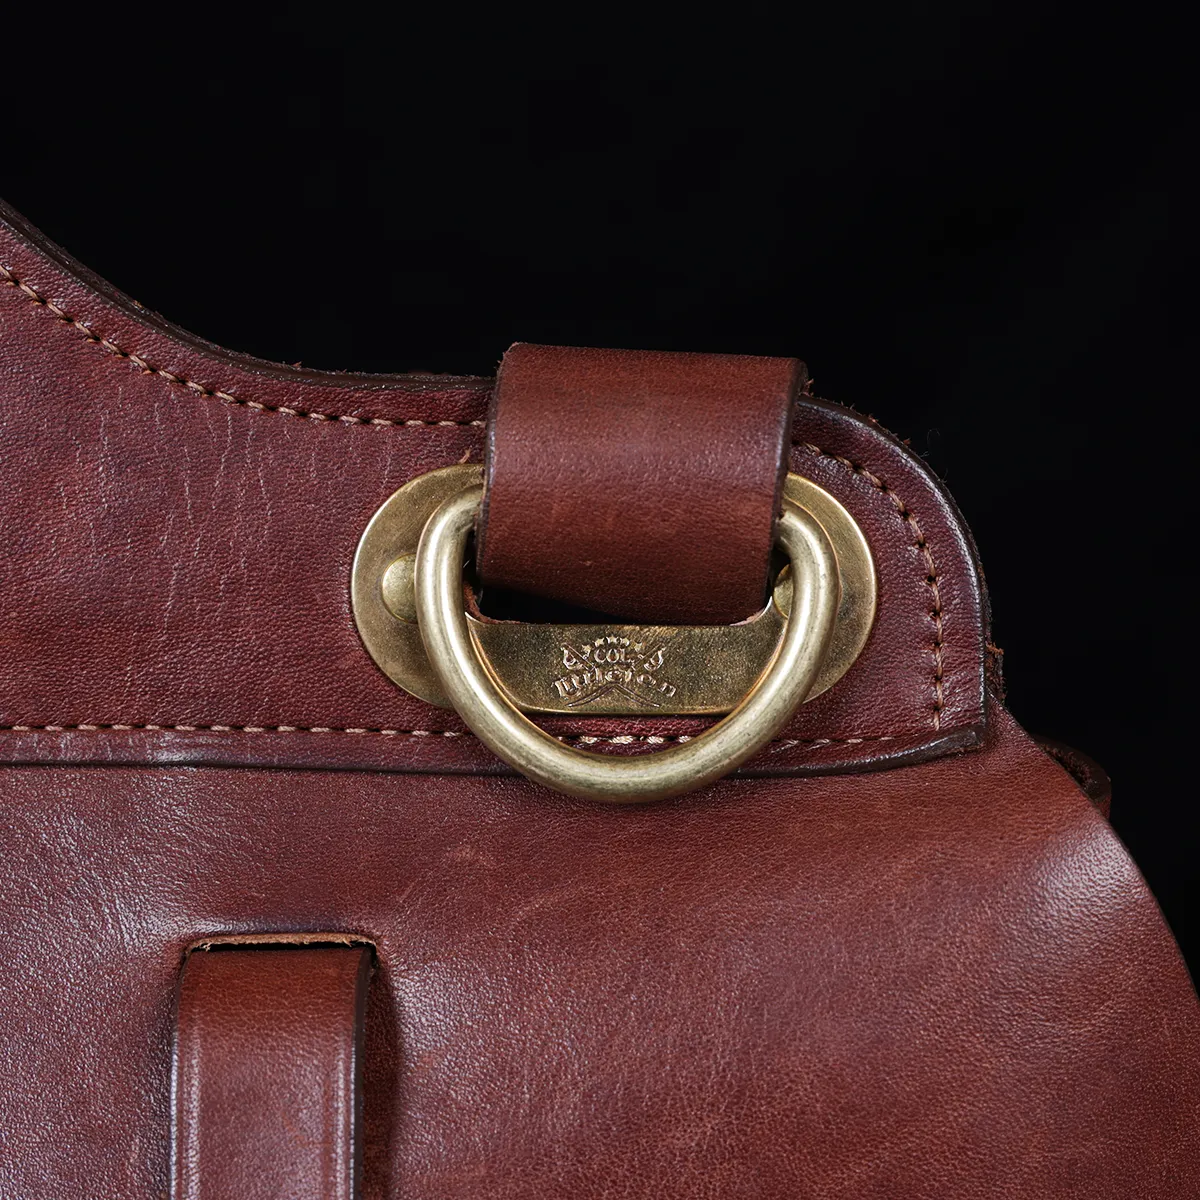 No. 1 Saddlebag Briefcase on a wooden table with a dark background - strap view